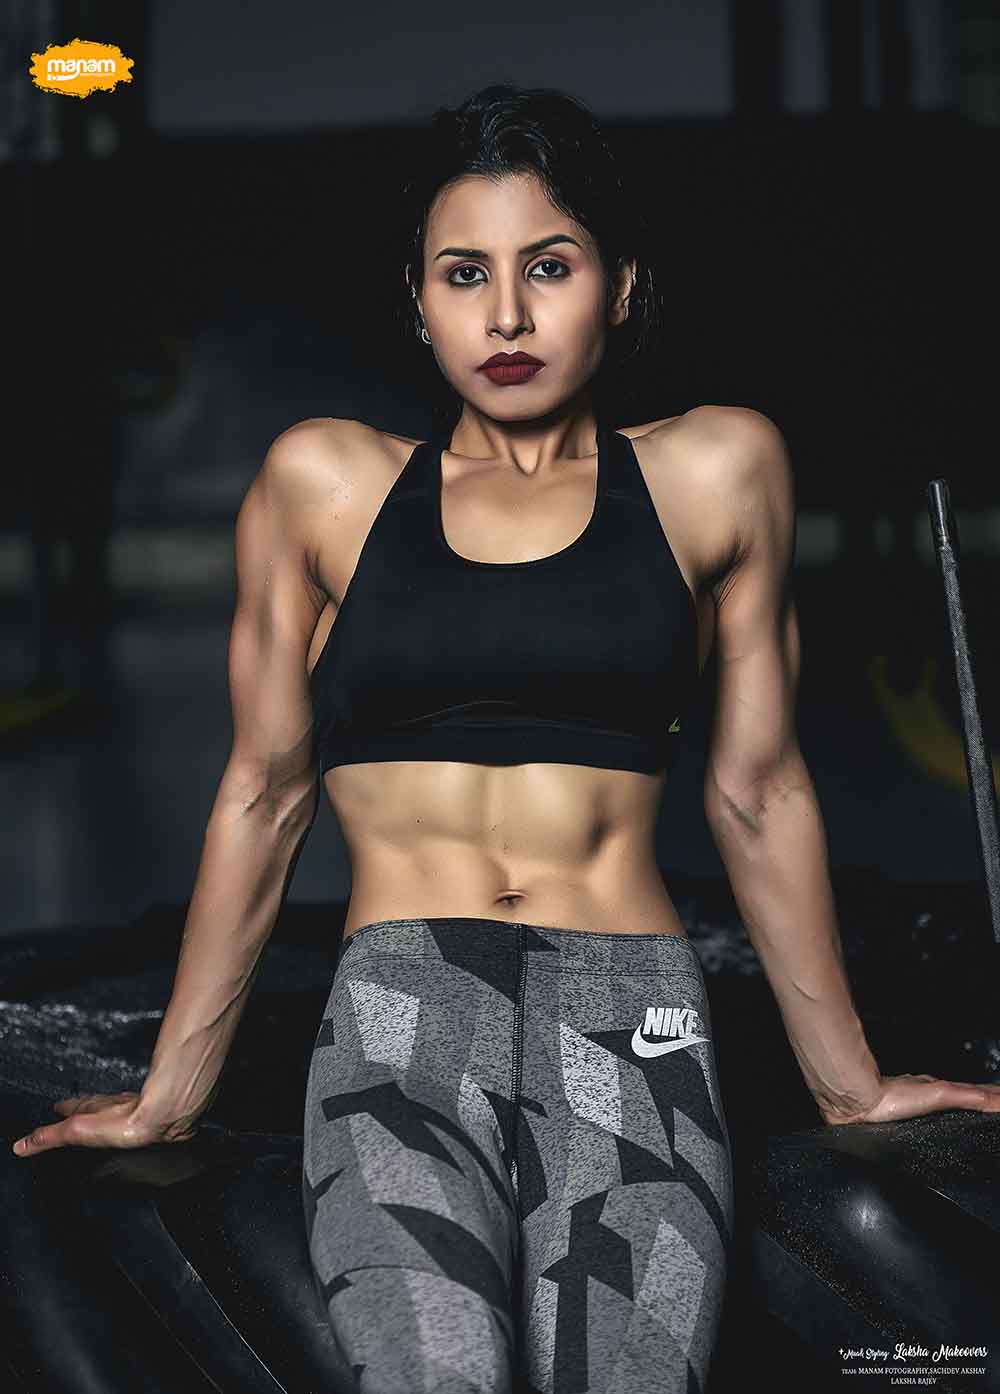 Hailing from Lucknow, Ankita’s decision to take up gymming was almost a spontaneous one